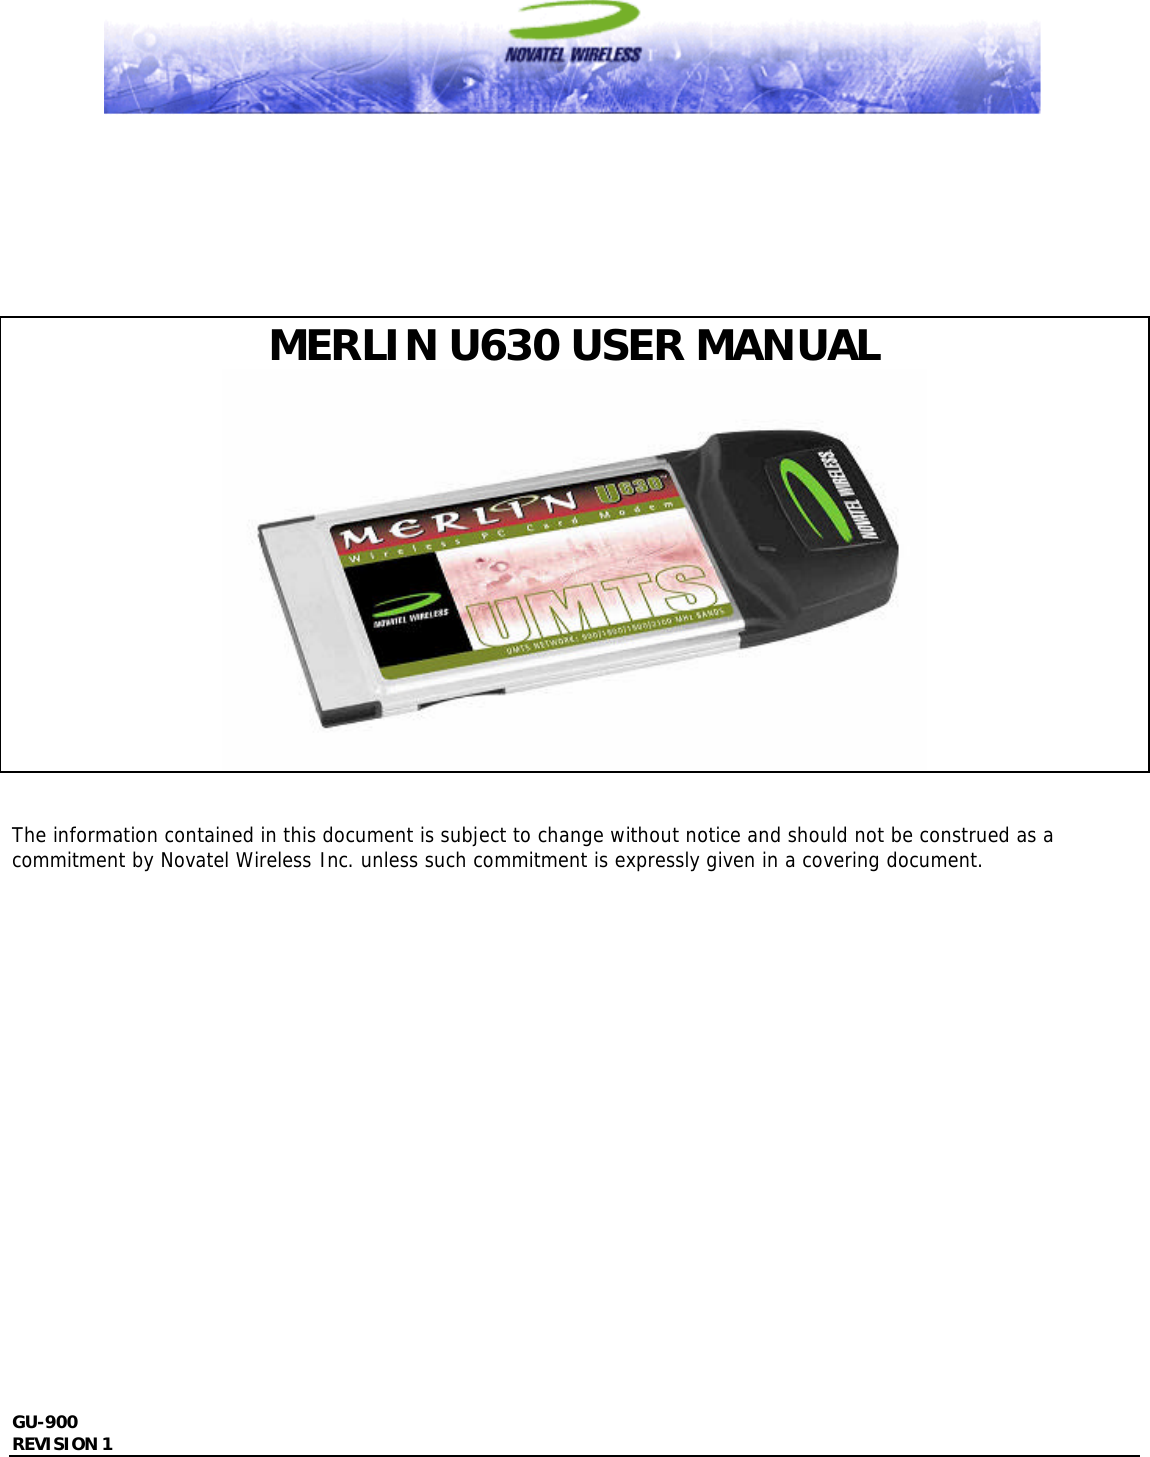  GU-900 REVISION 1                  MERLIN U630 USER MANUAL    The information contained in this document is subject to change without notice and should not be construed as a commitment by Novatel Wireless Inc. unless such commitment is expressly given in a covering document.                    